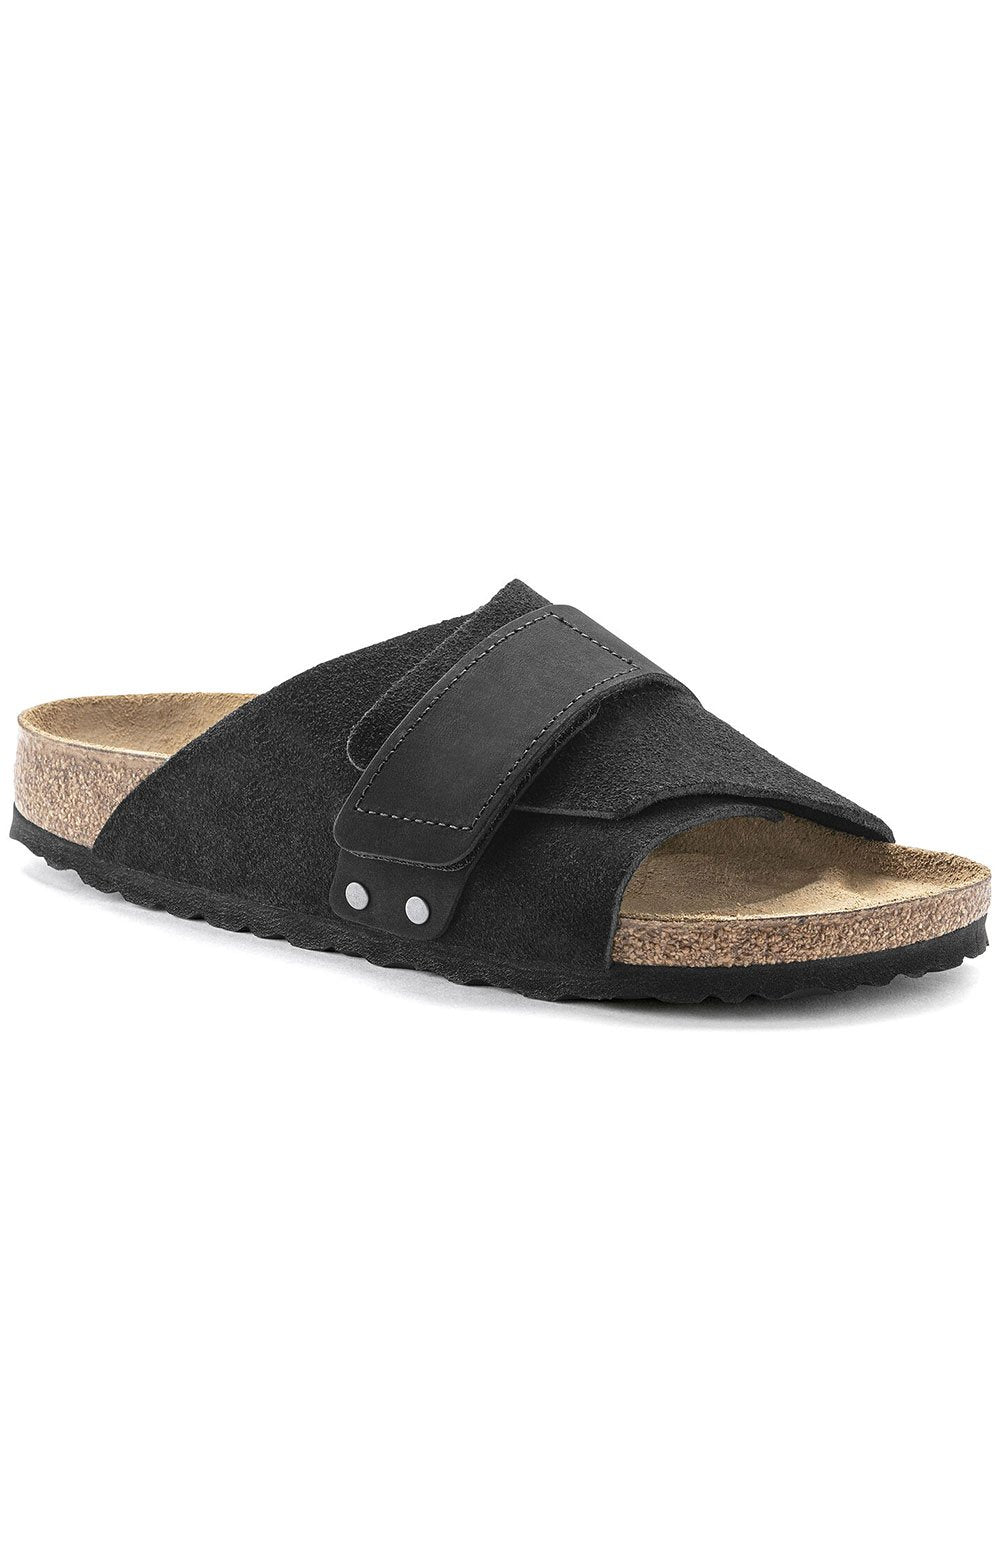 Kyoto Sandals Black, made of high-quality leather with adjustable straps and comfortable cushioned sole